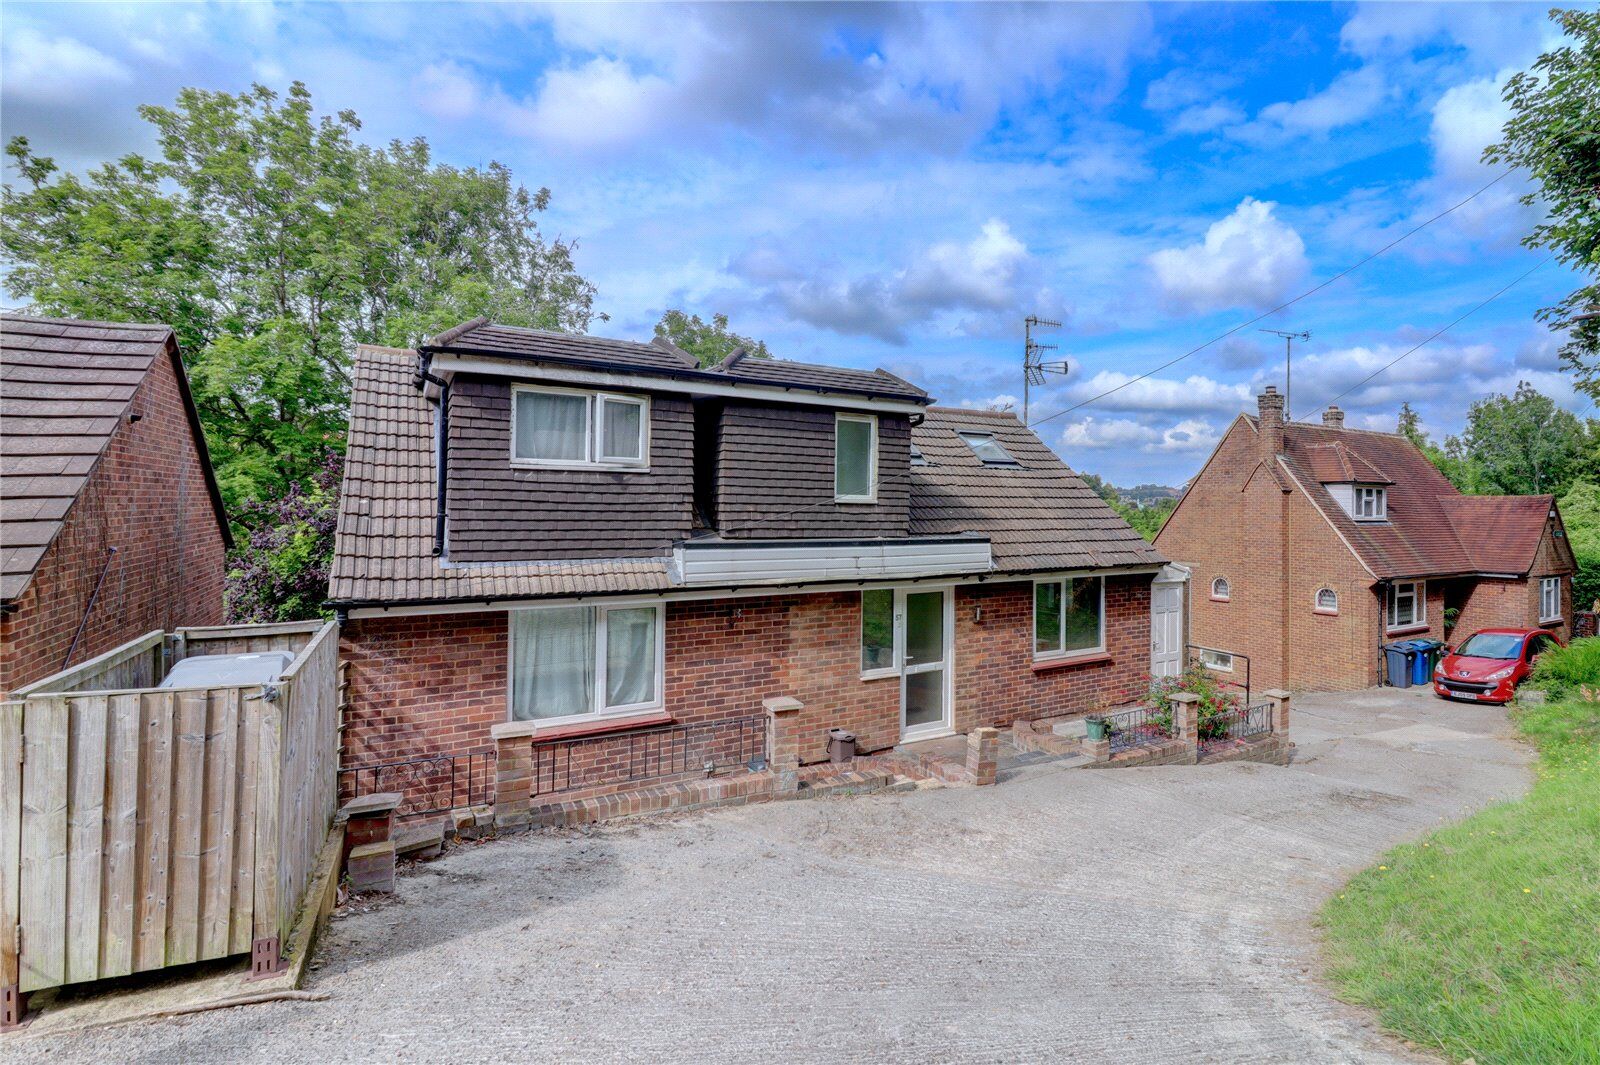 4 bedroom detached house for sale Carrington Road, High Wycombe, HP12, main image